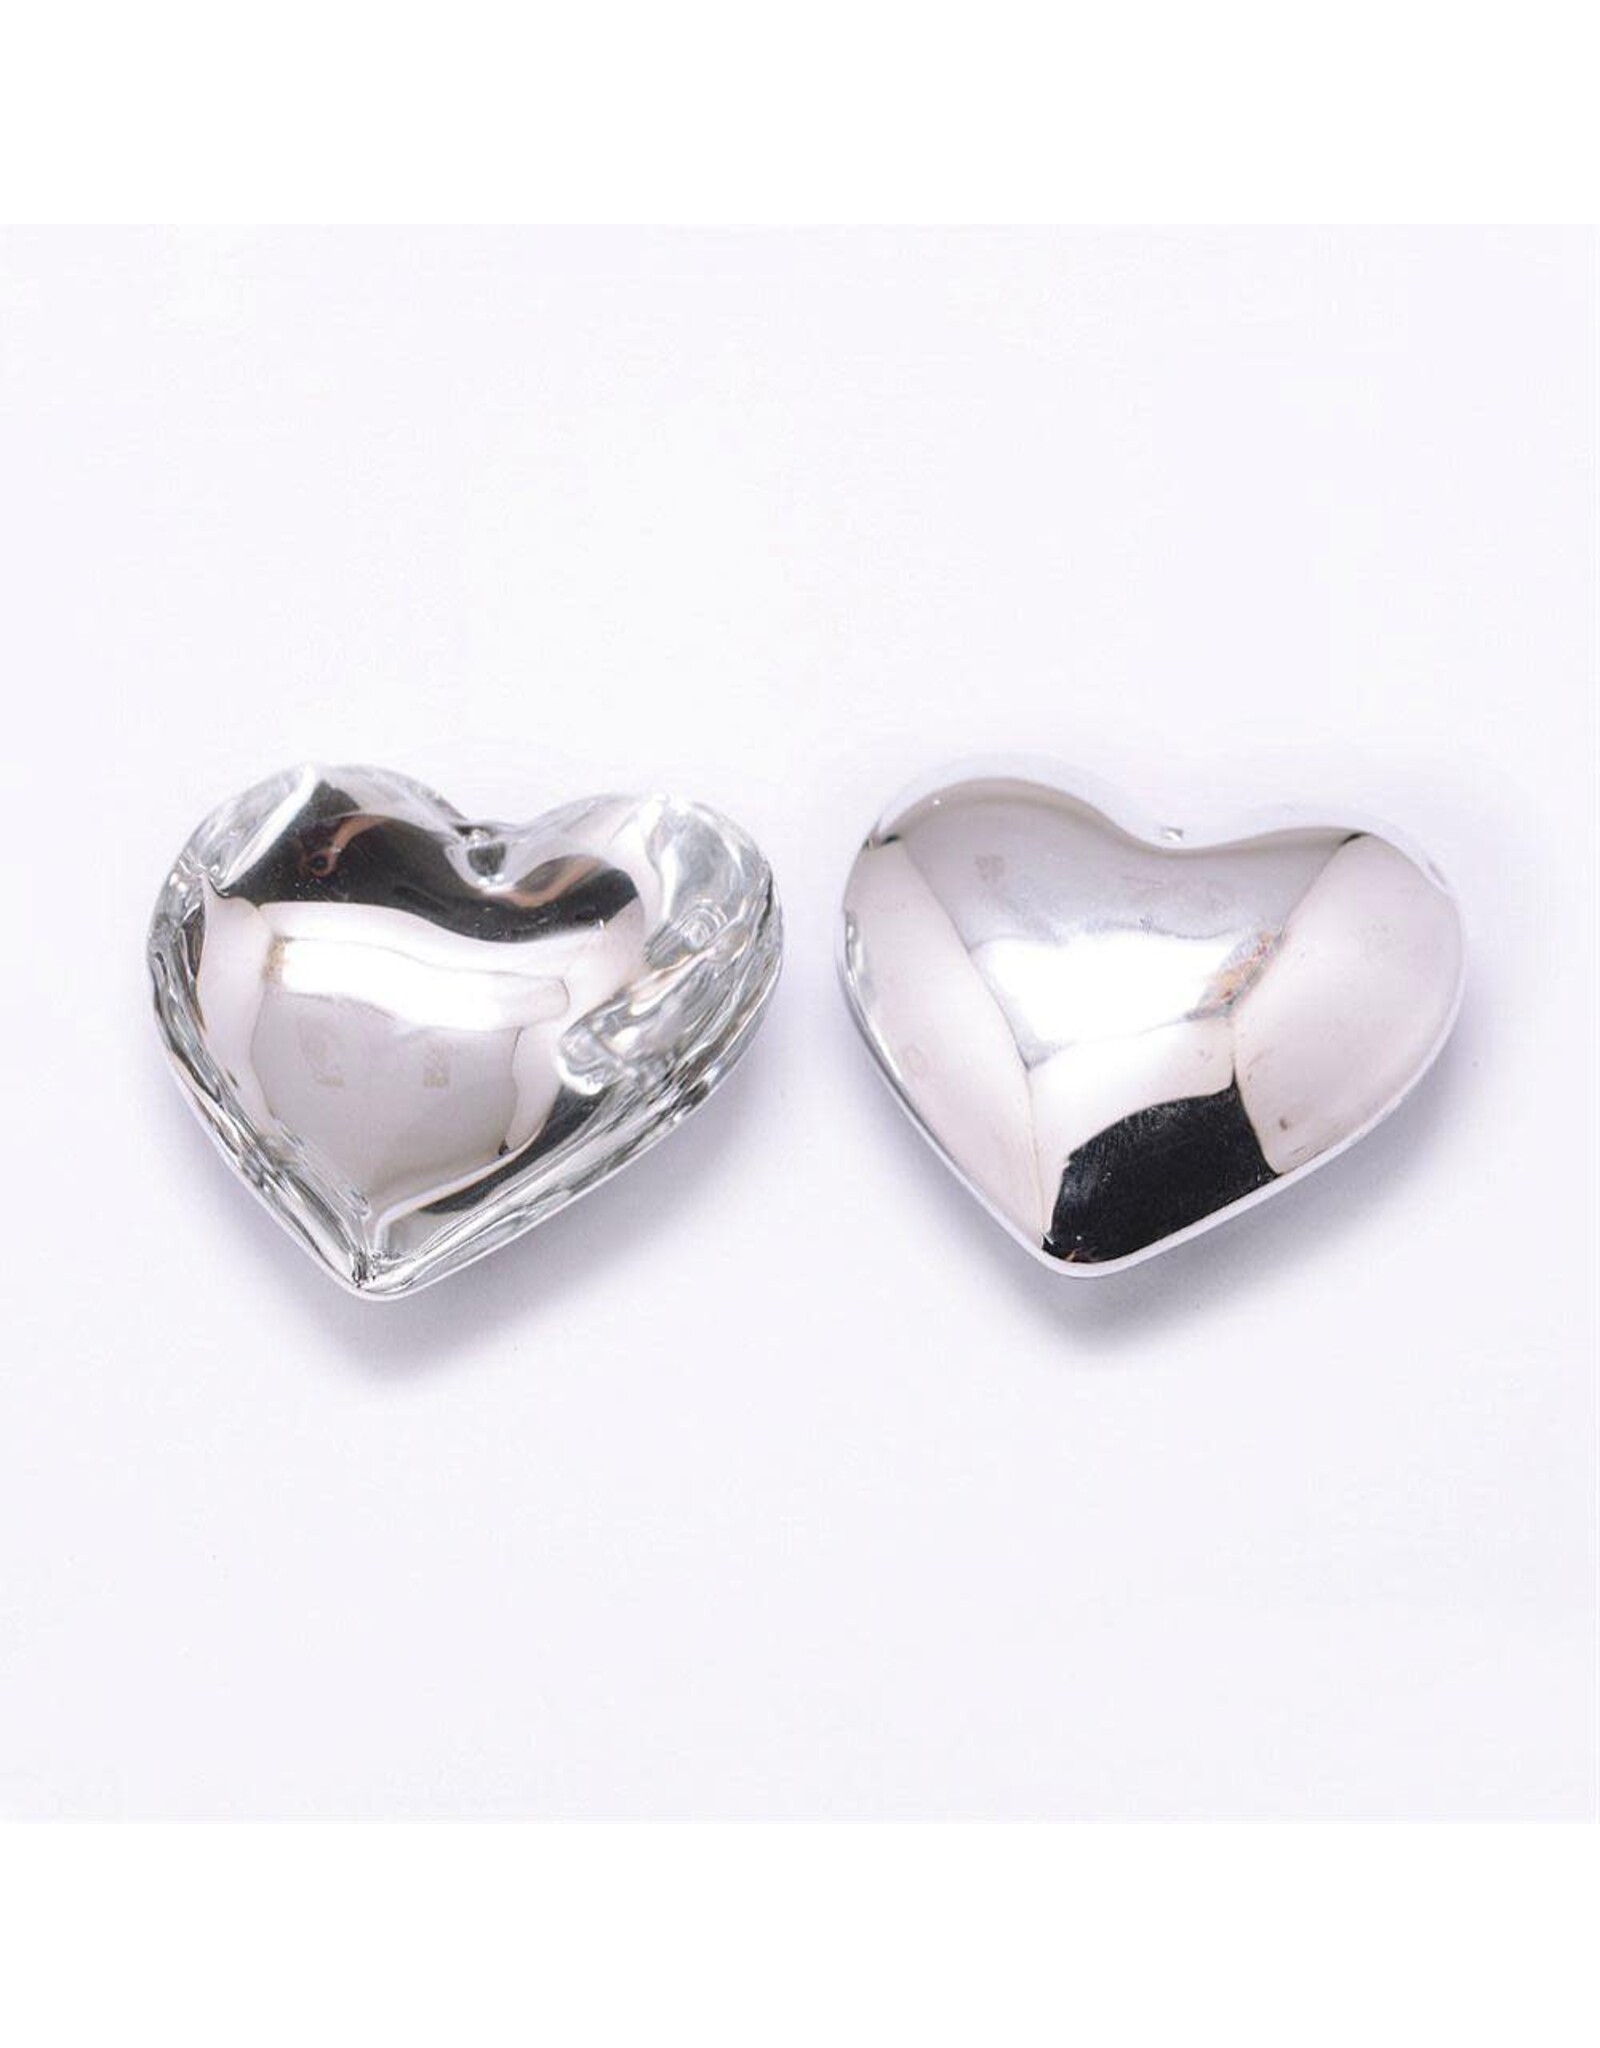 Heart  Clear With Silver Foil Backing 42x43x15mm  x1